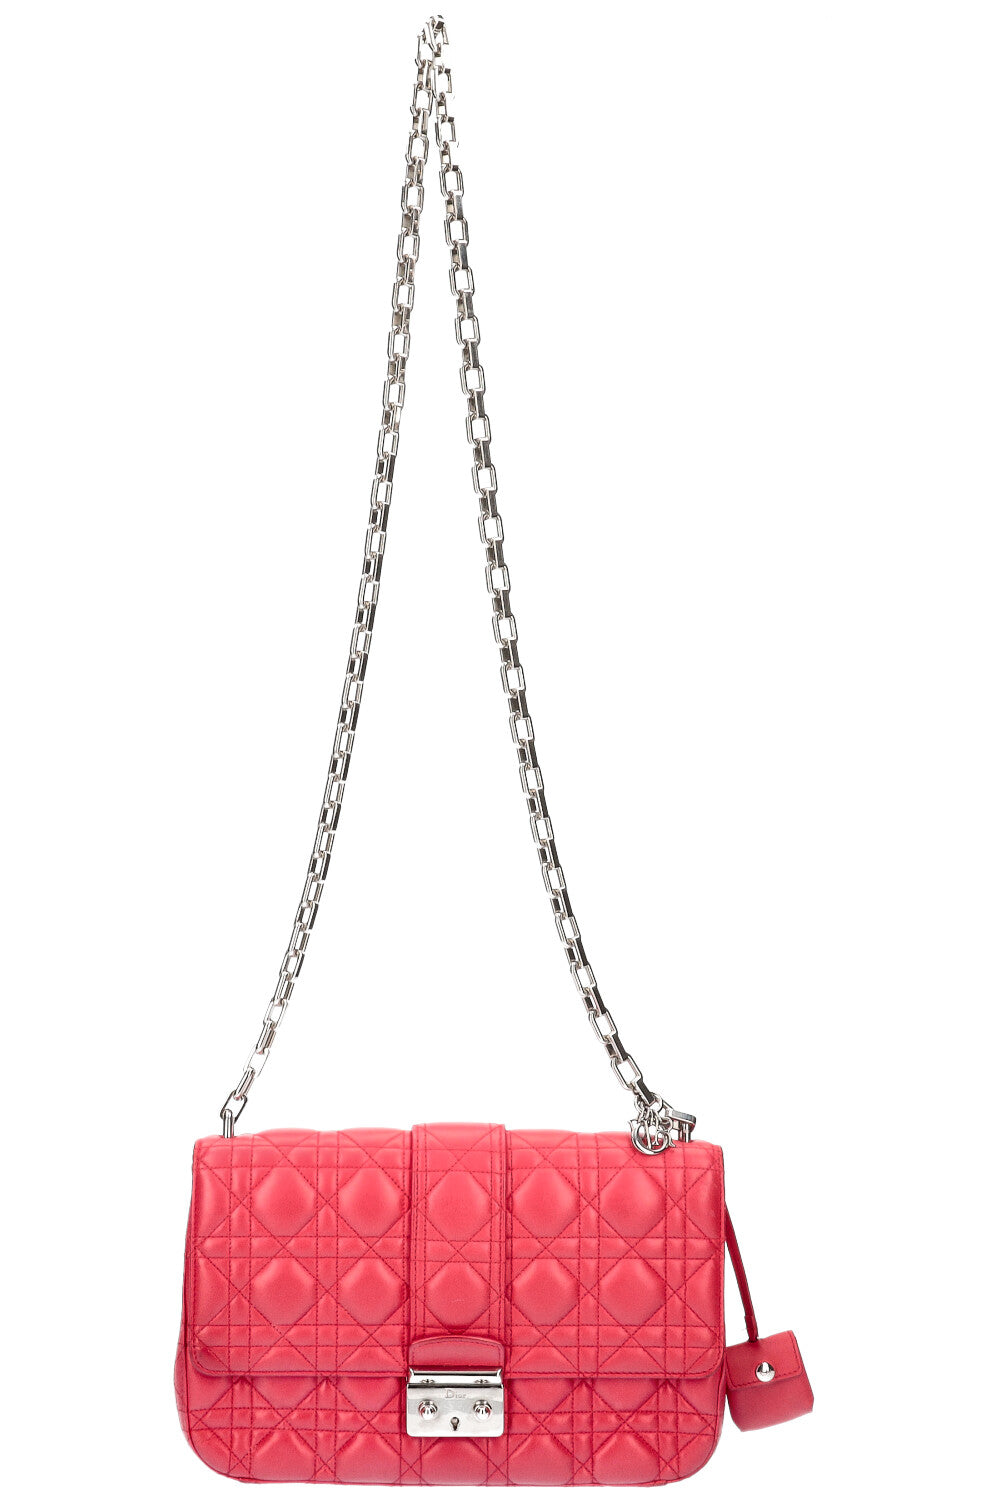 Miss Dior Bag Cannage Pink 2011